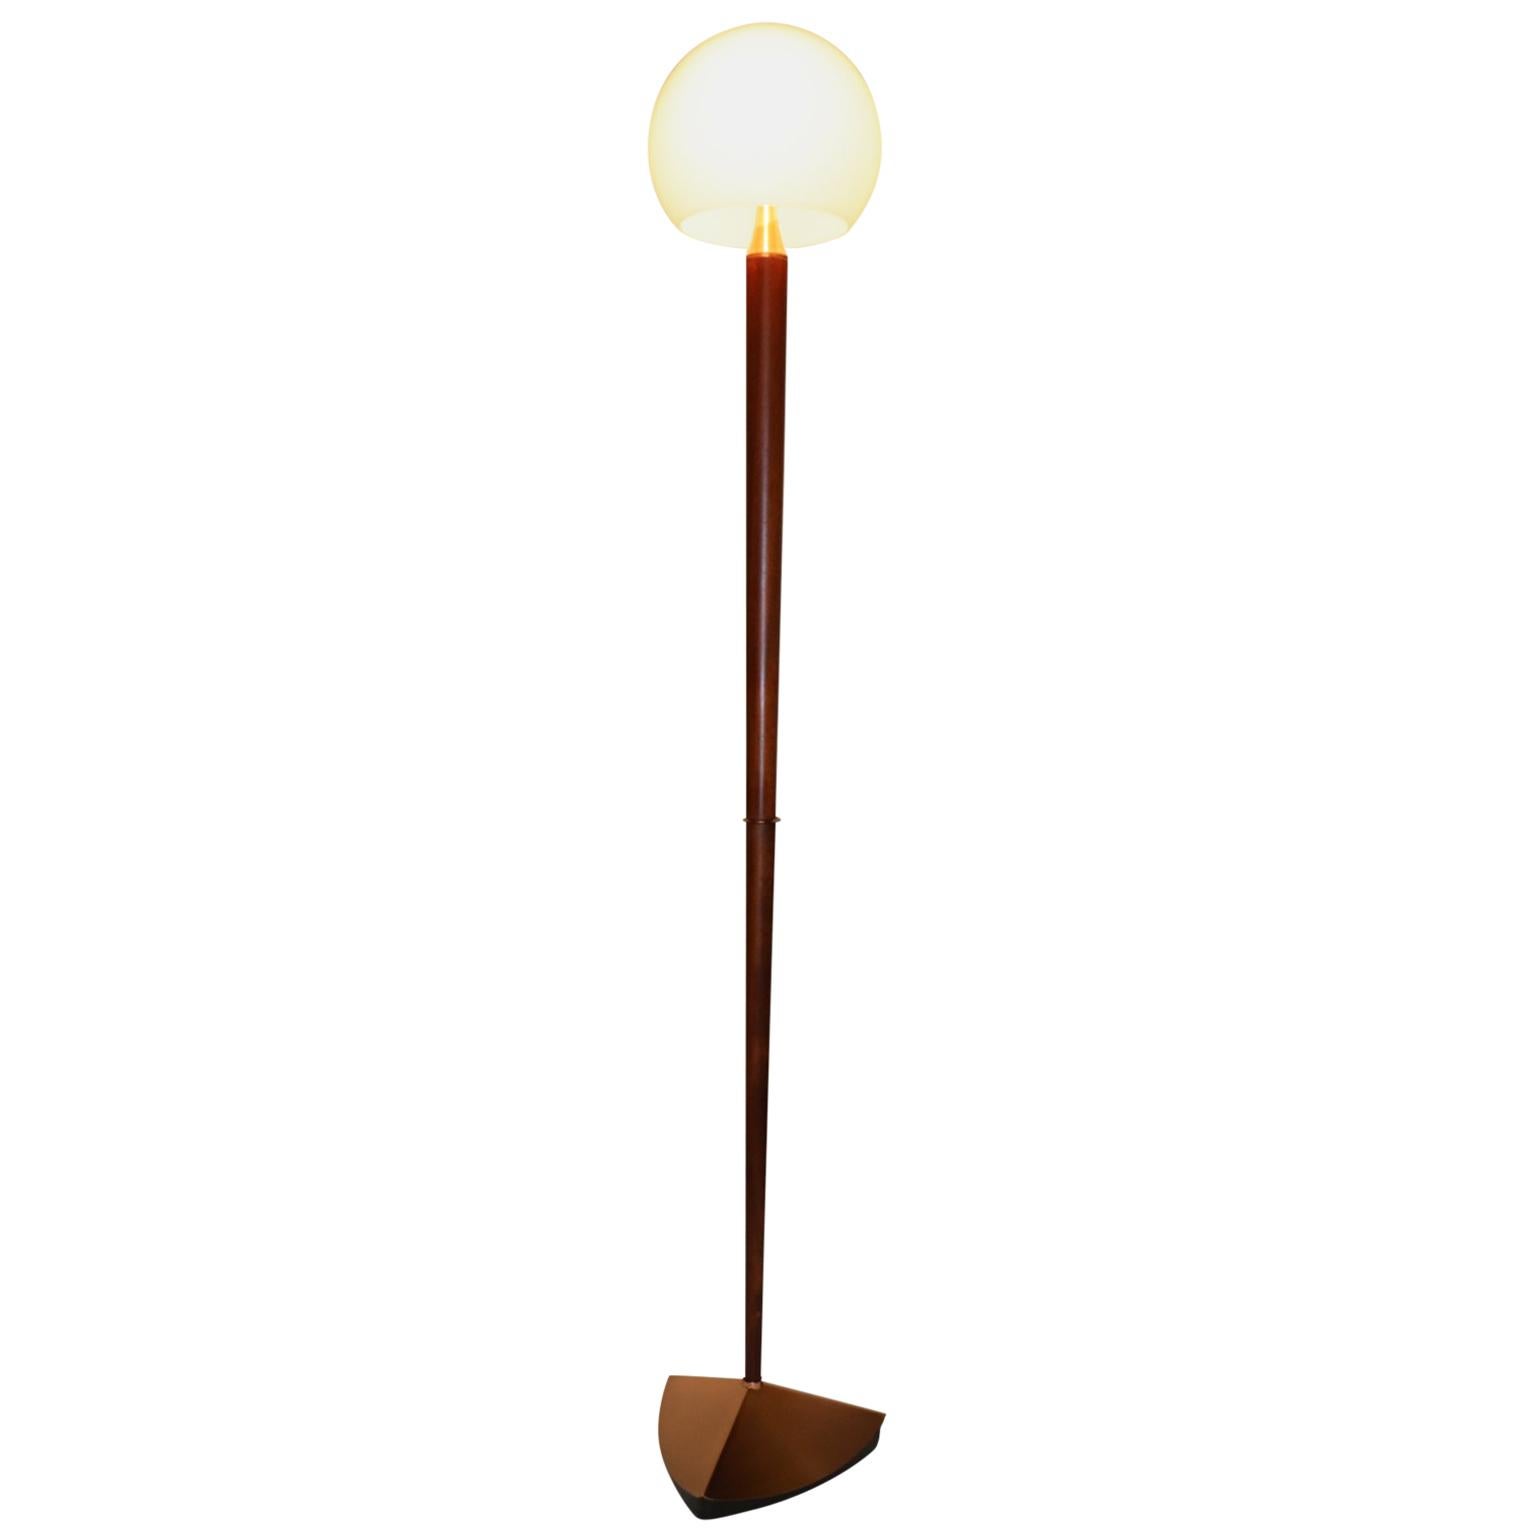 Italian Floor Lamp White Murano Glass Solid Wood Stem and Brushed Copper Details For Sale